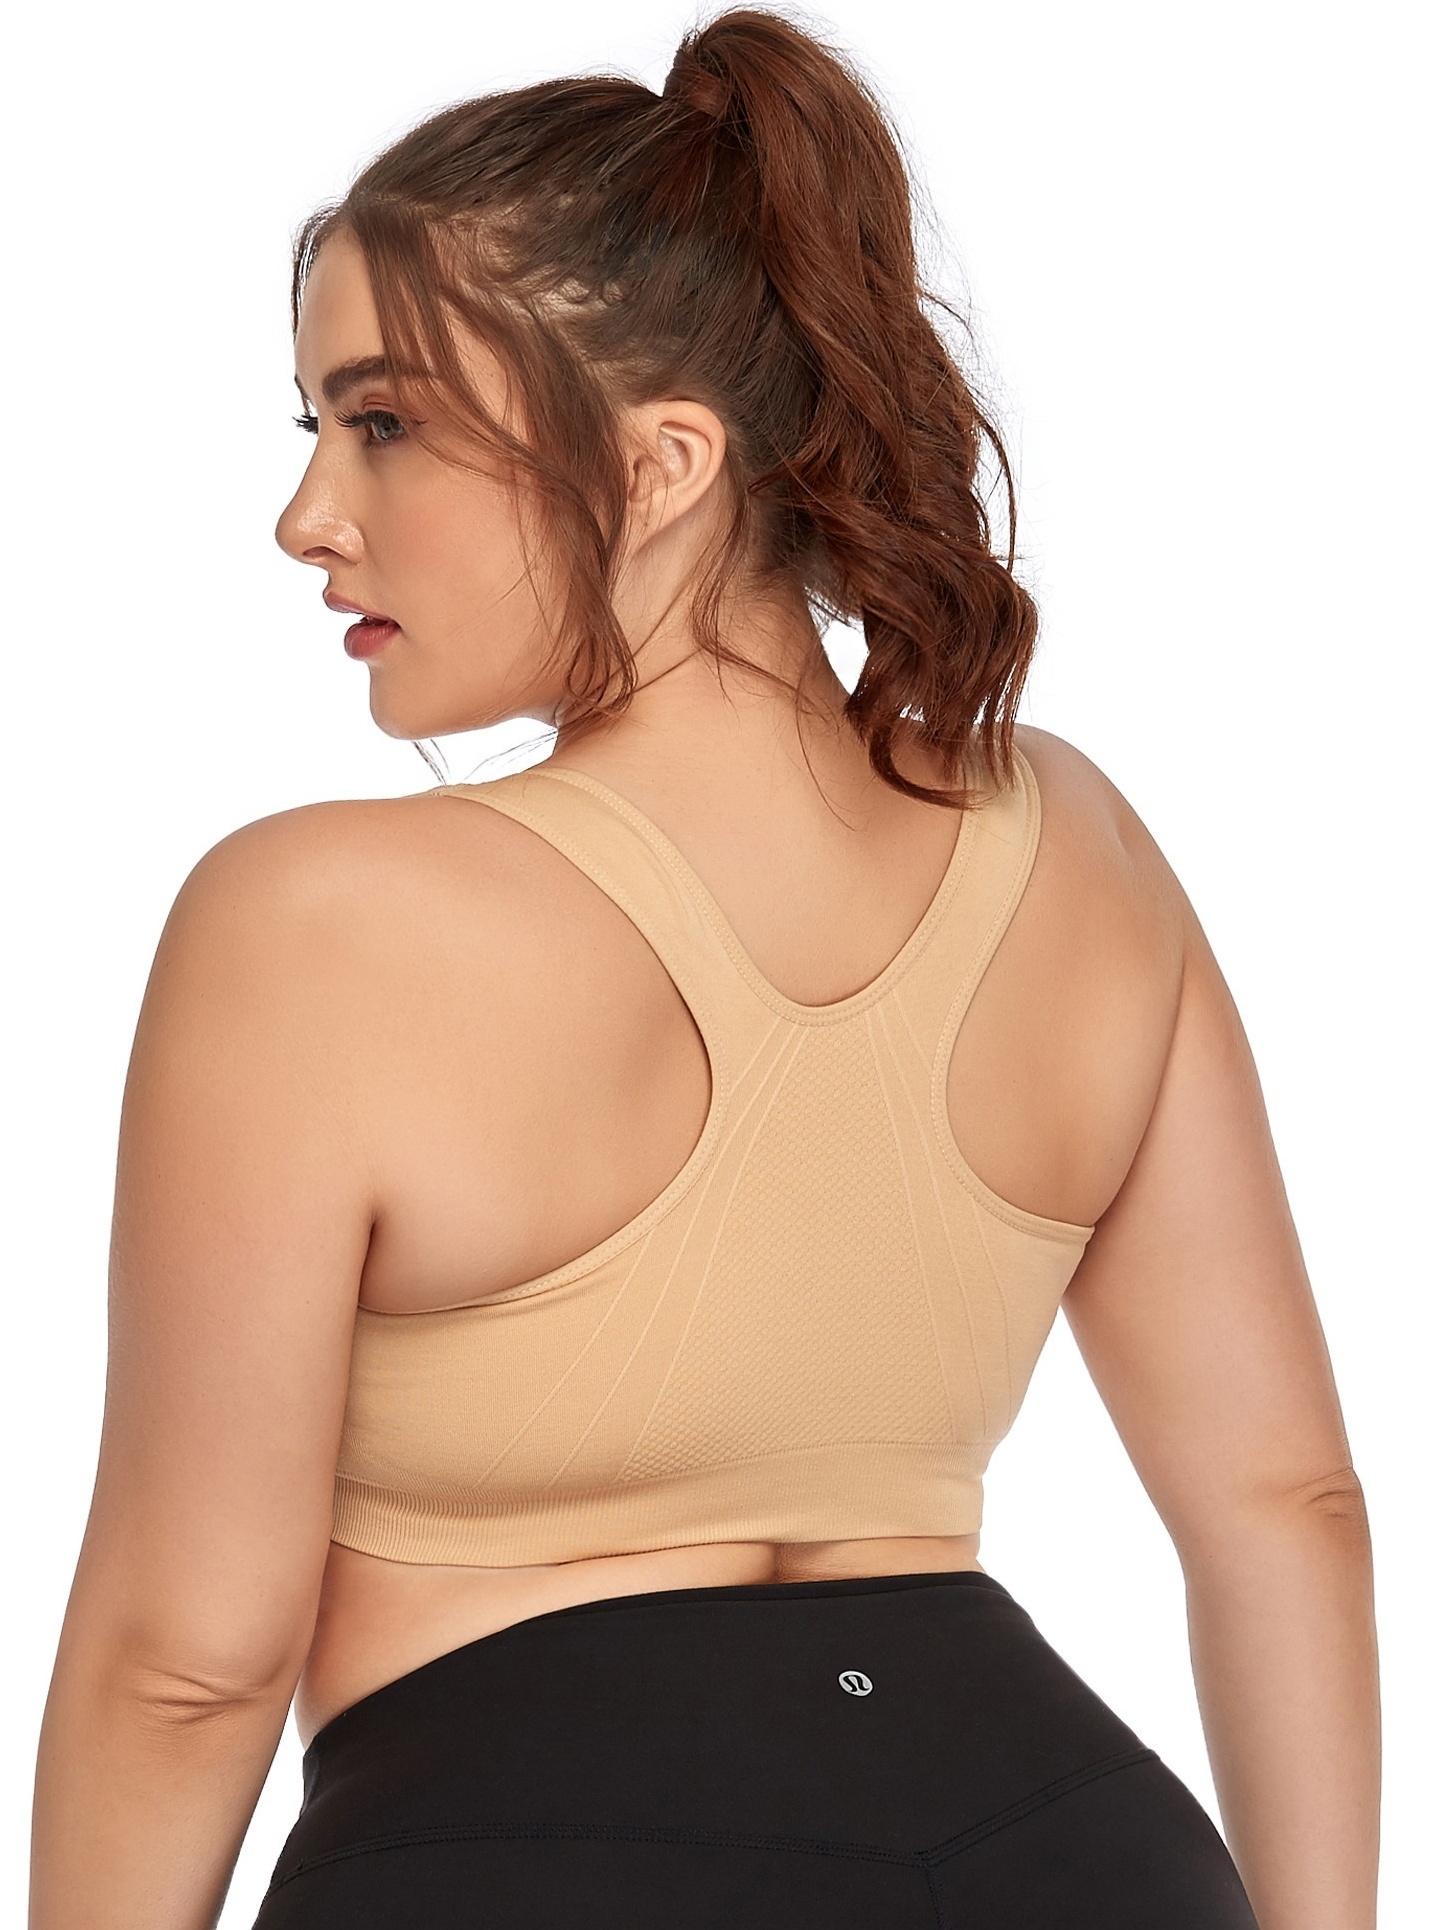 Plus Size Women'S Summer Thin Sports Bra, Back Beauty, Gather, Anti -  Overflow, No Steel Ring, Front Buckle, No Trace